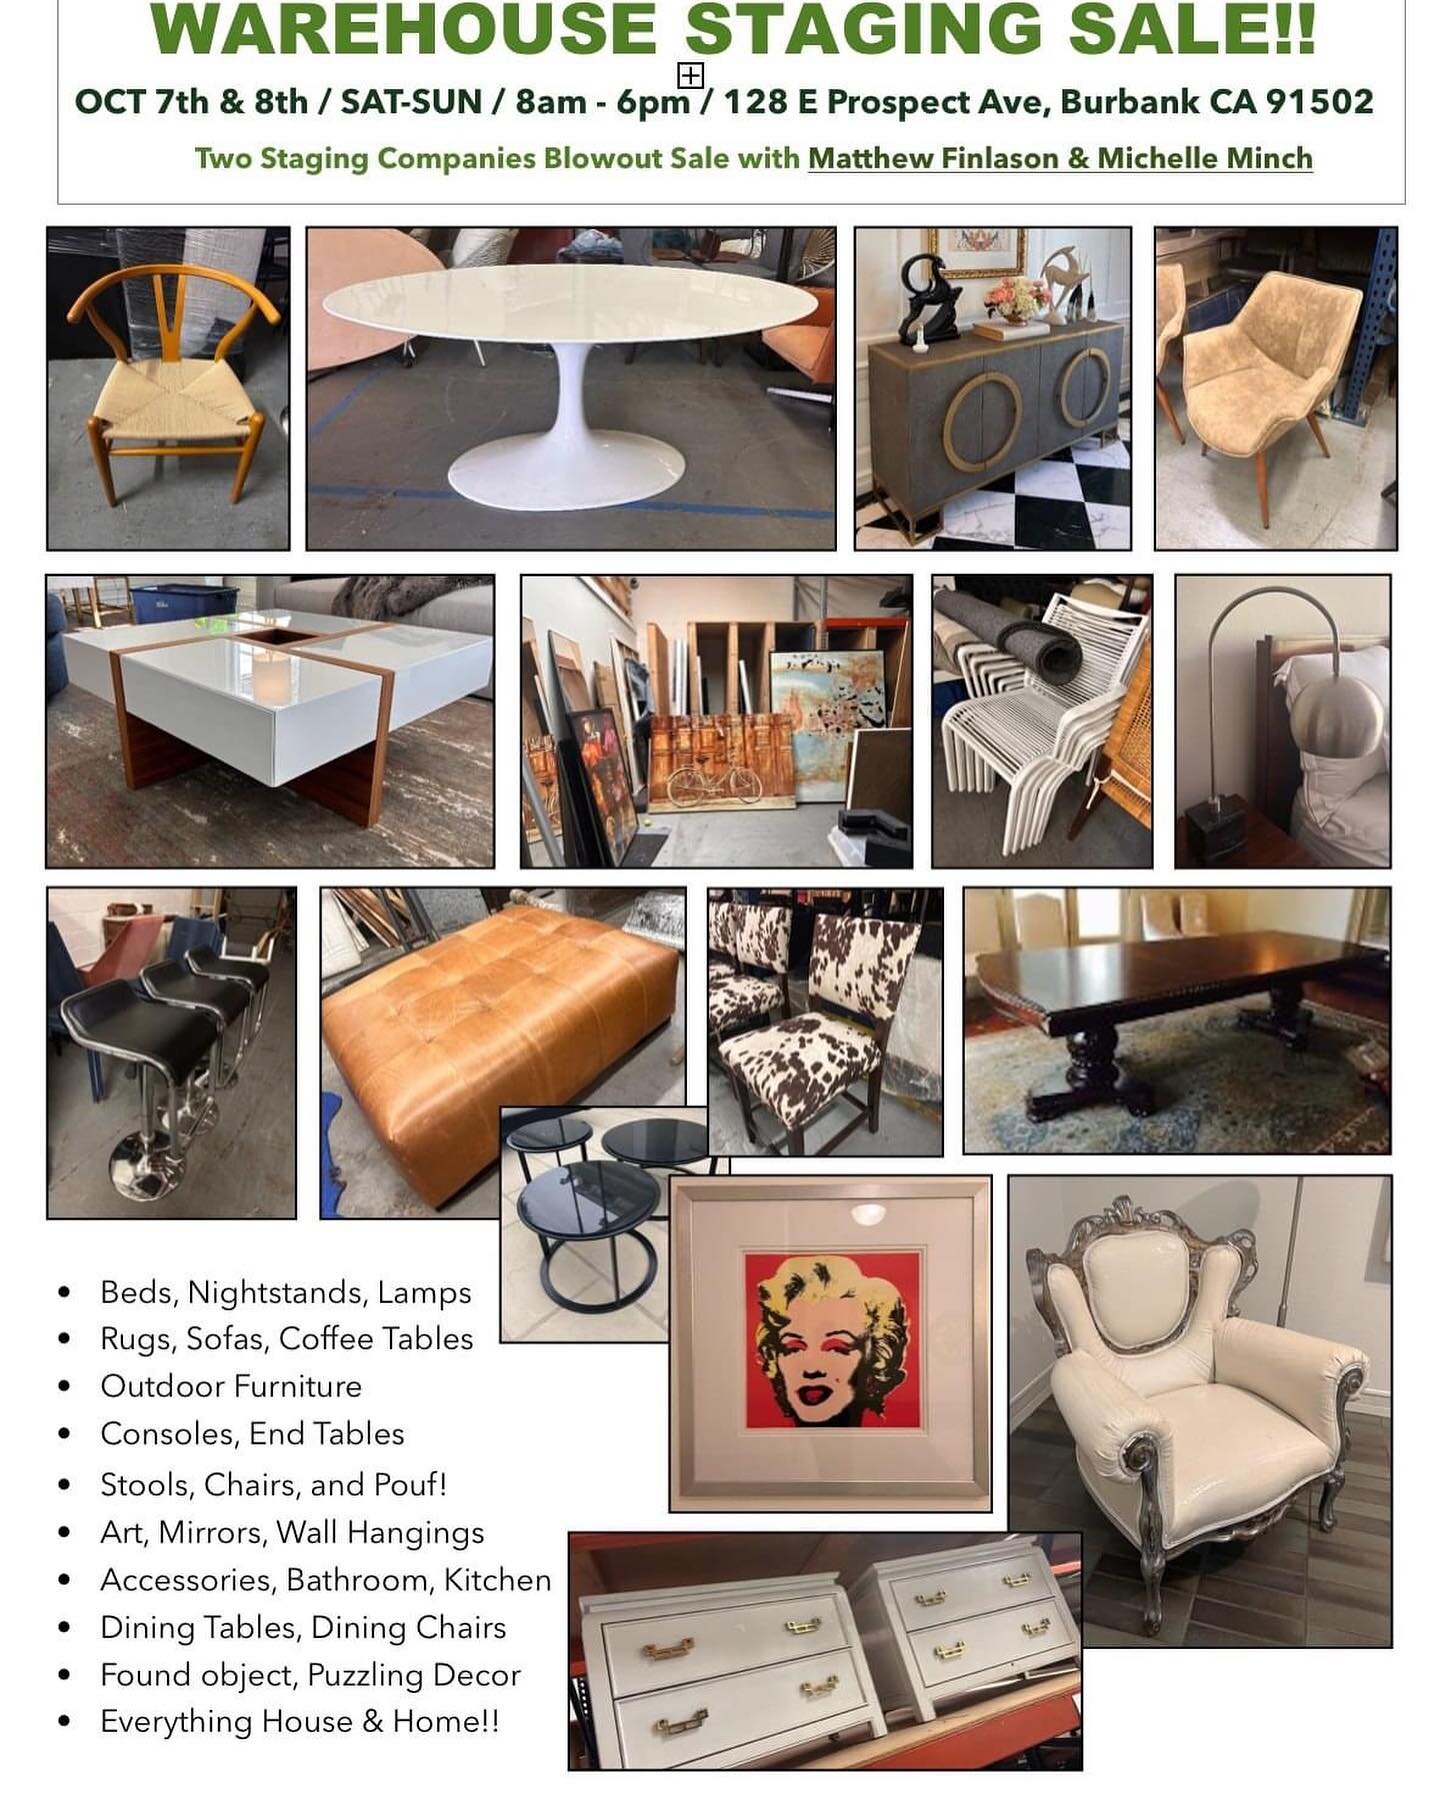 Staging Warehouse Sale!  Get it while you can! 

Oct 7 &amp; 8, Sat and Sun 8a-6p

Blowout sale from 2 stagers, @matthewfinlasondesign and @homestagingpro 

See u there!
#furnituresale #stagingsale #warehousesale #designer #interiordecor